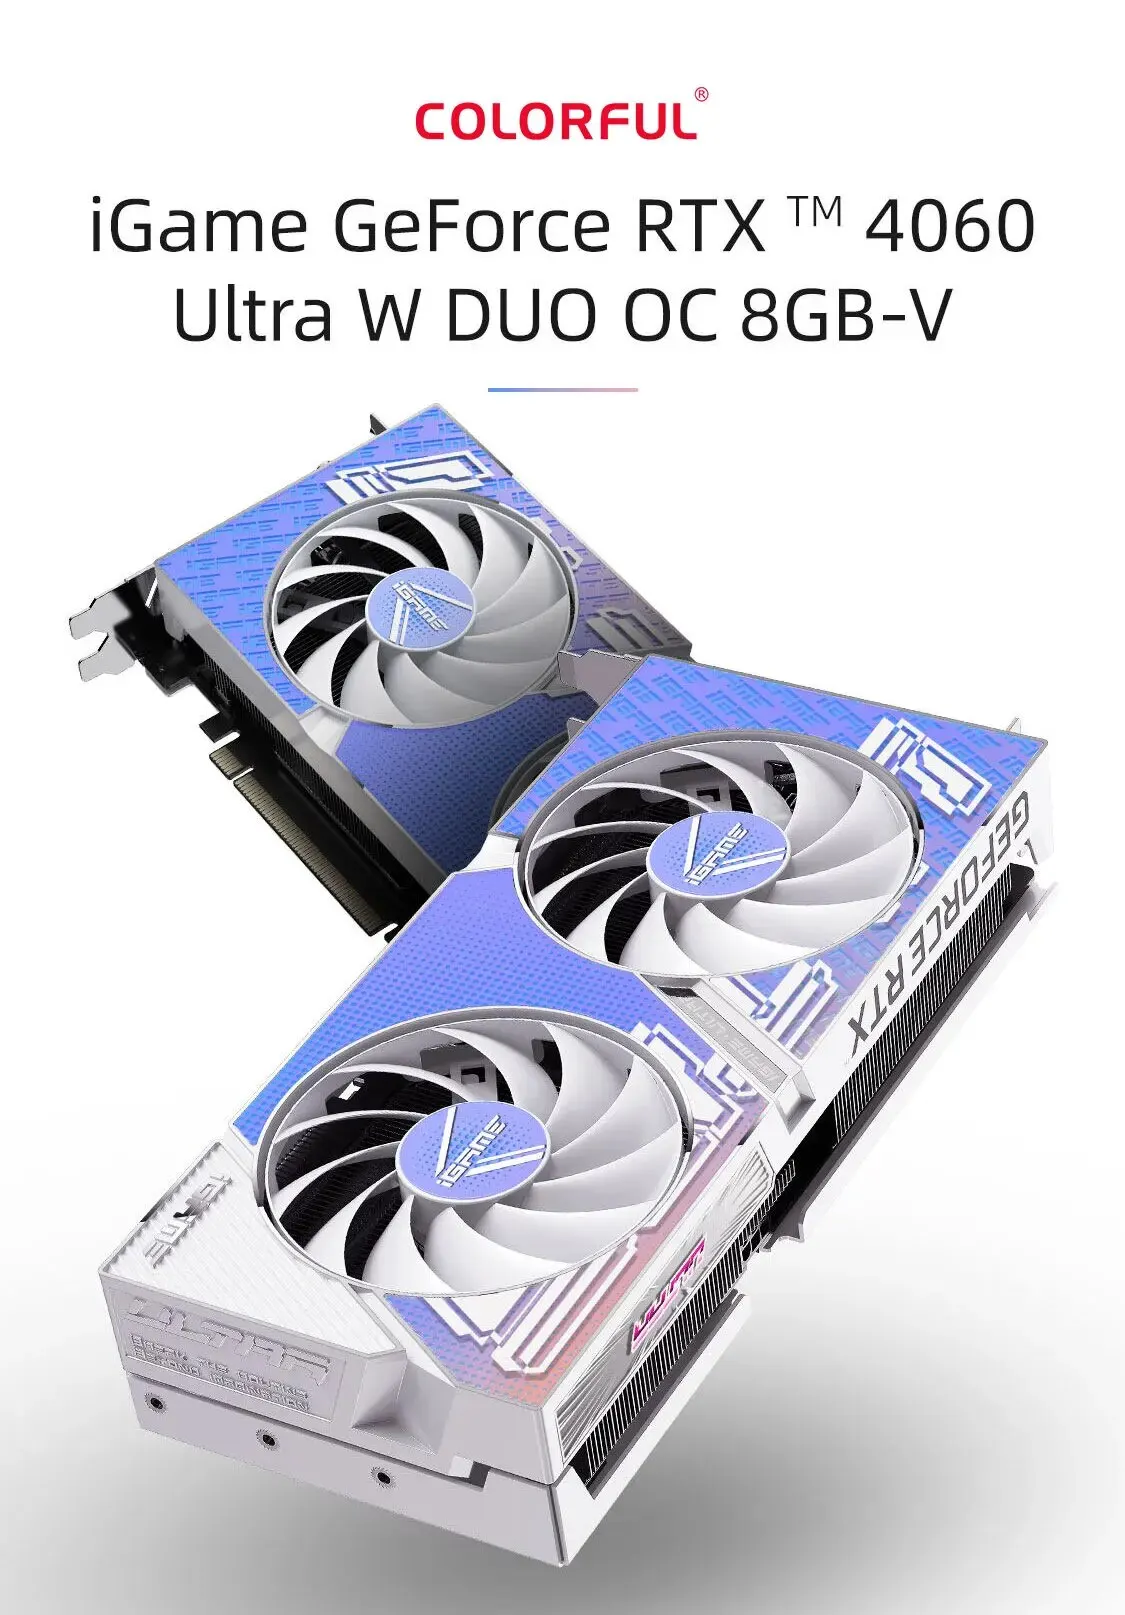 4060 Colorful. Colorful igame rtx 4060 ultra